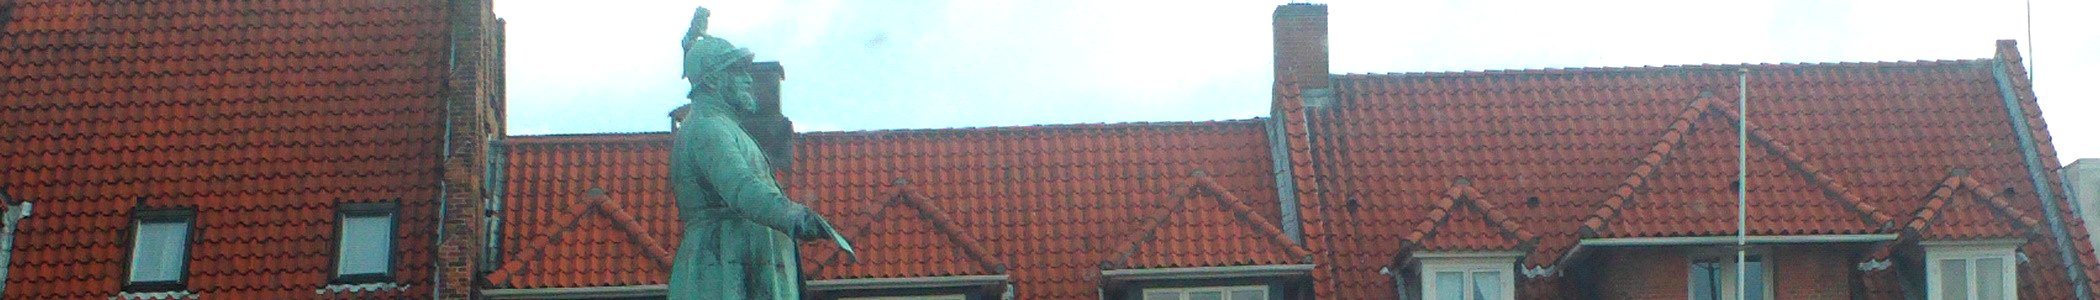 Koge banner Tiled roofs and statue